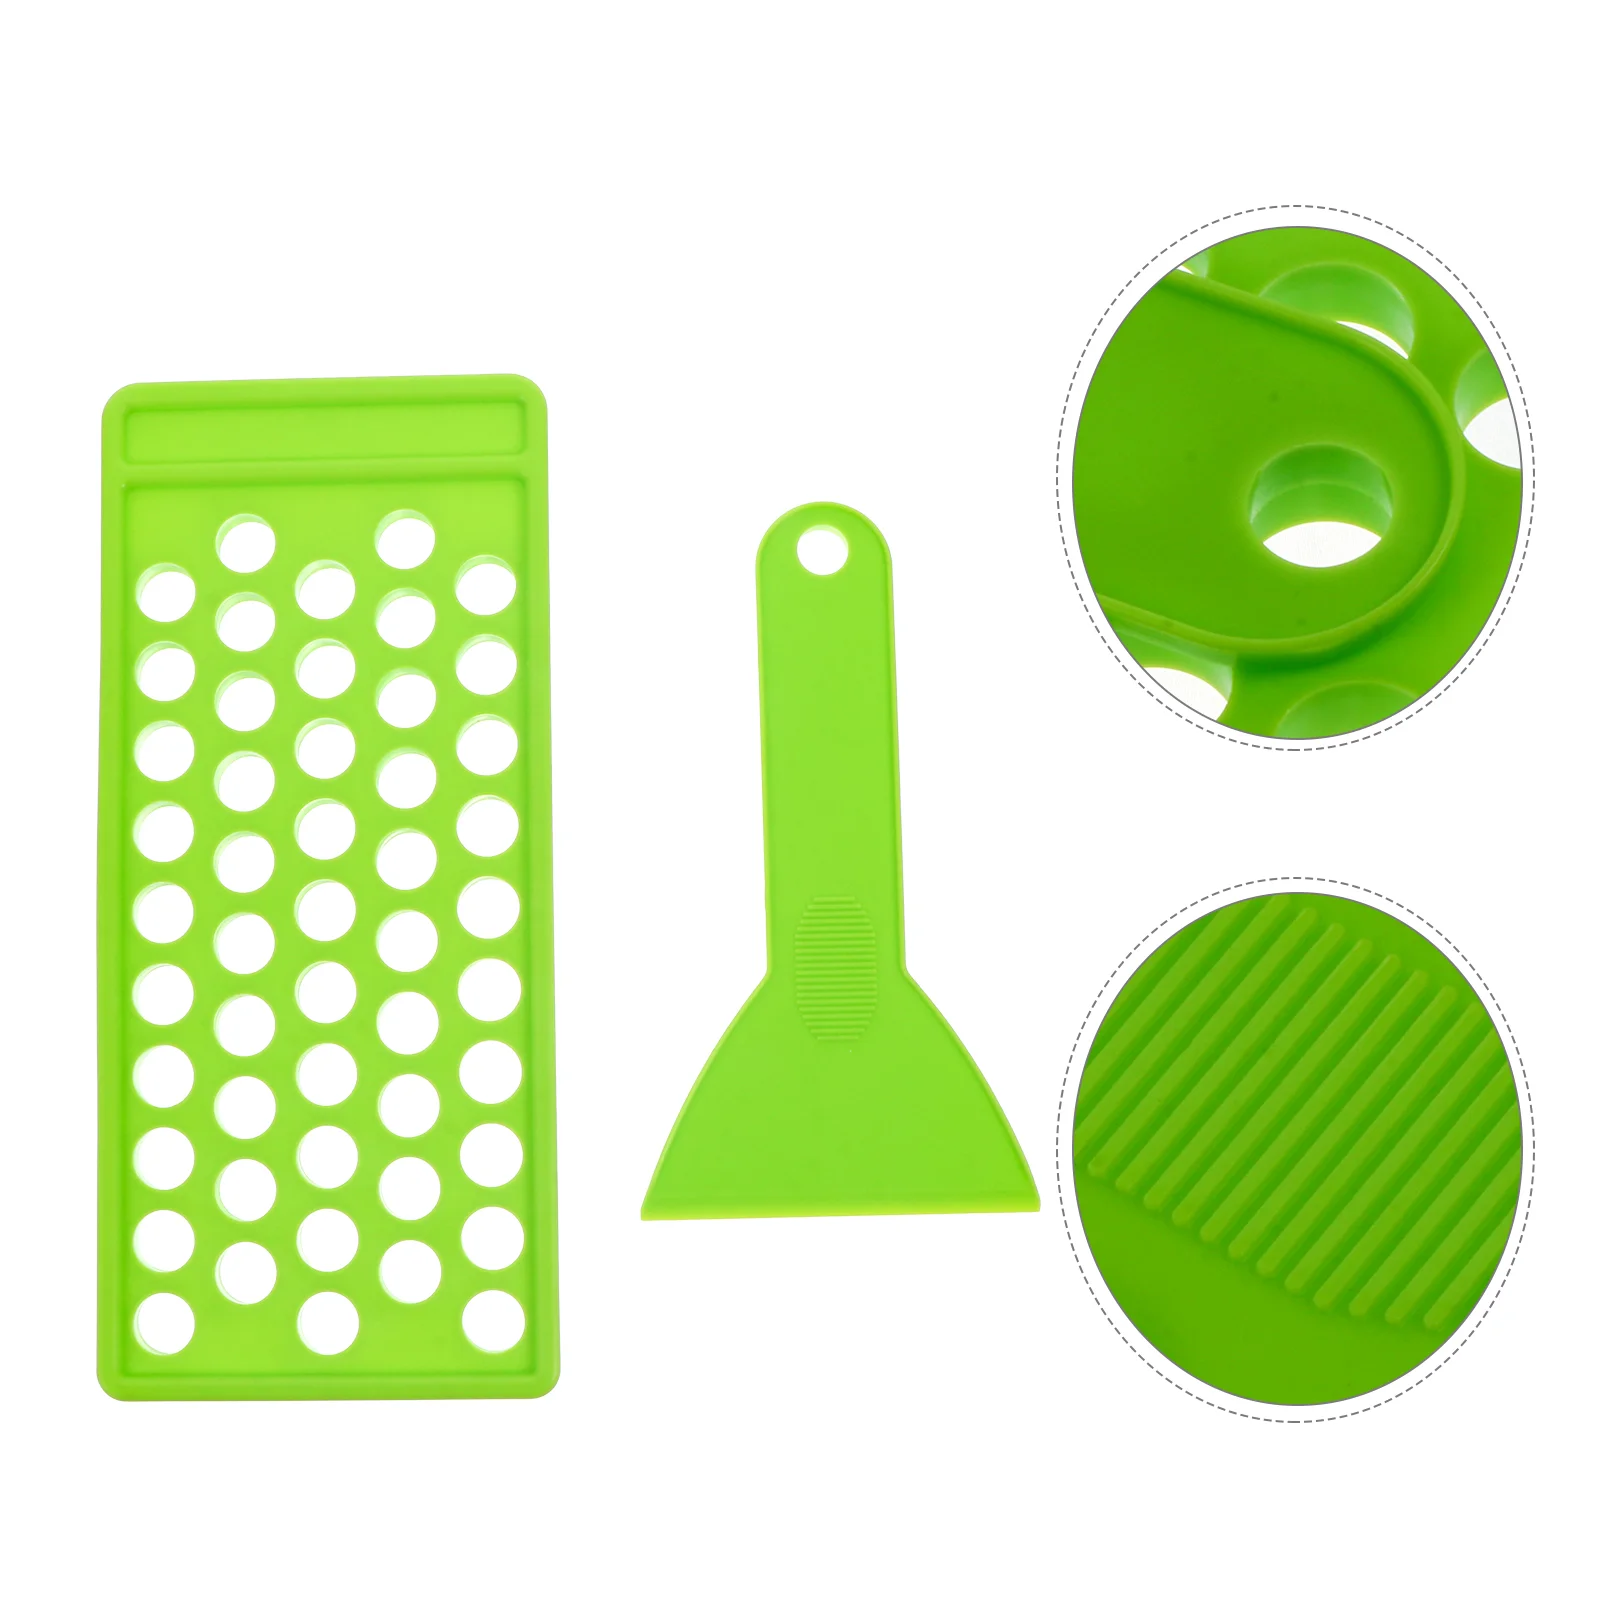 

Lip Balm Filling Tray and Spatula Set, Lip Balm Crafting Kits Holder 50 Holes Lip Balm Containers Making for DIY Lipstick, 1pcs